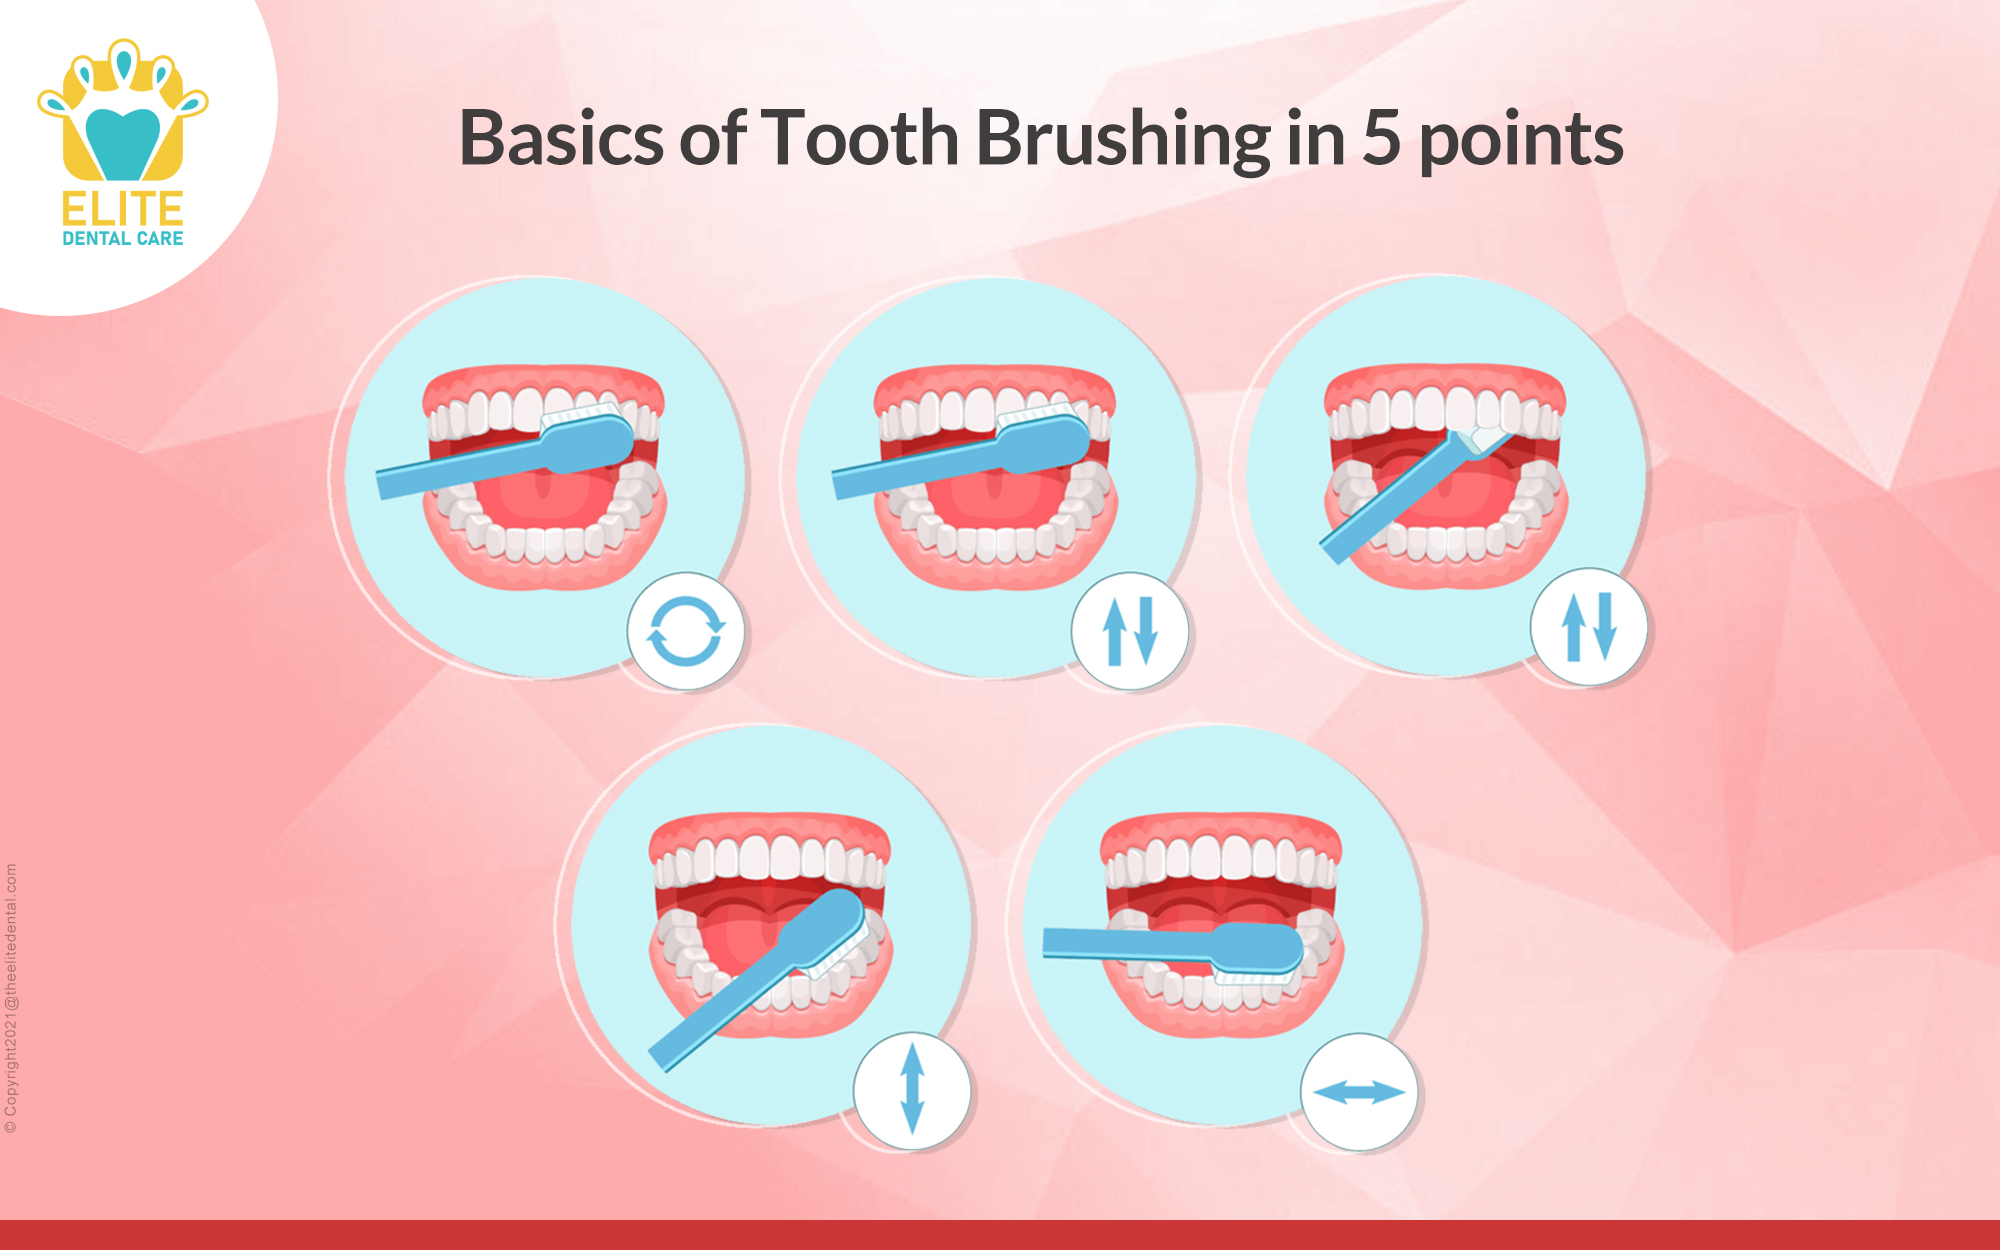 Basics of Tooth Brushing in 5 points